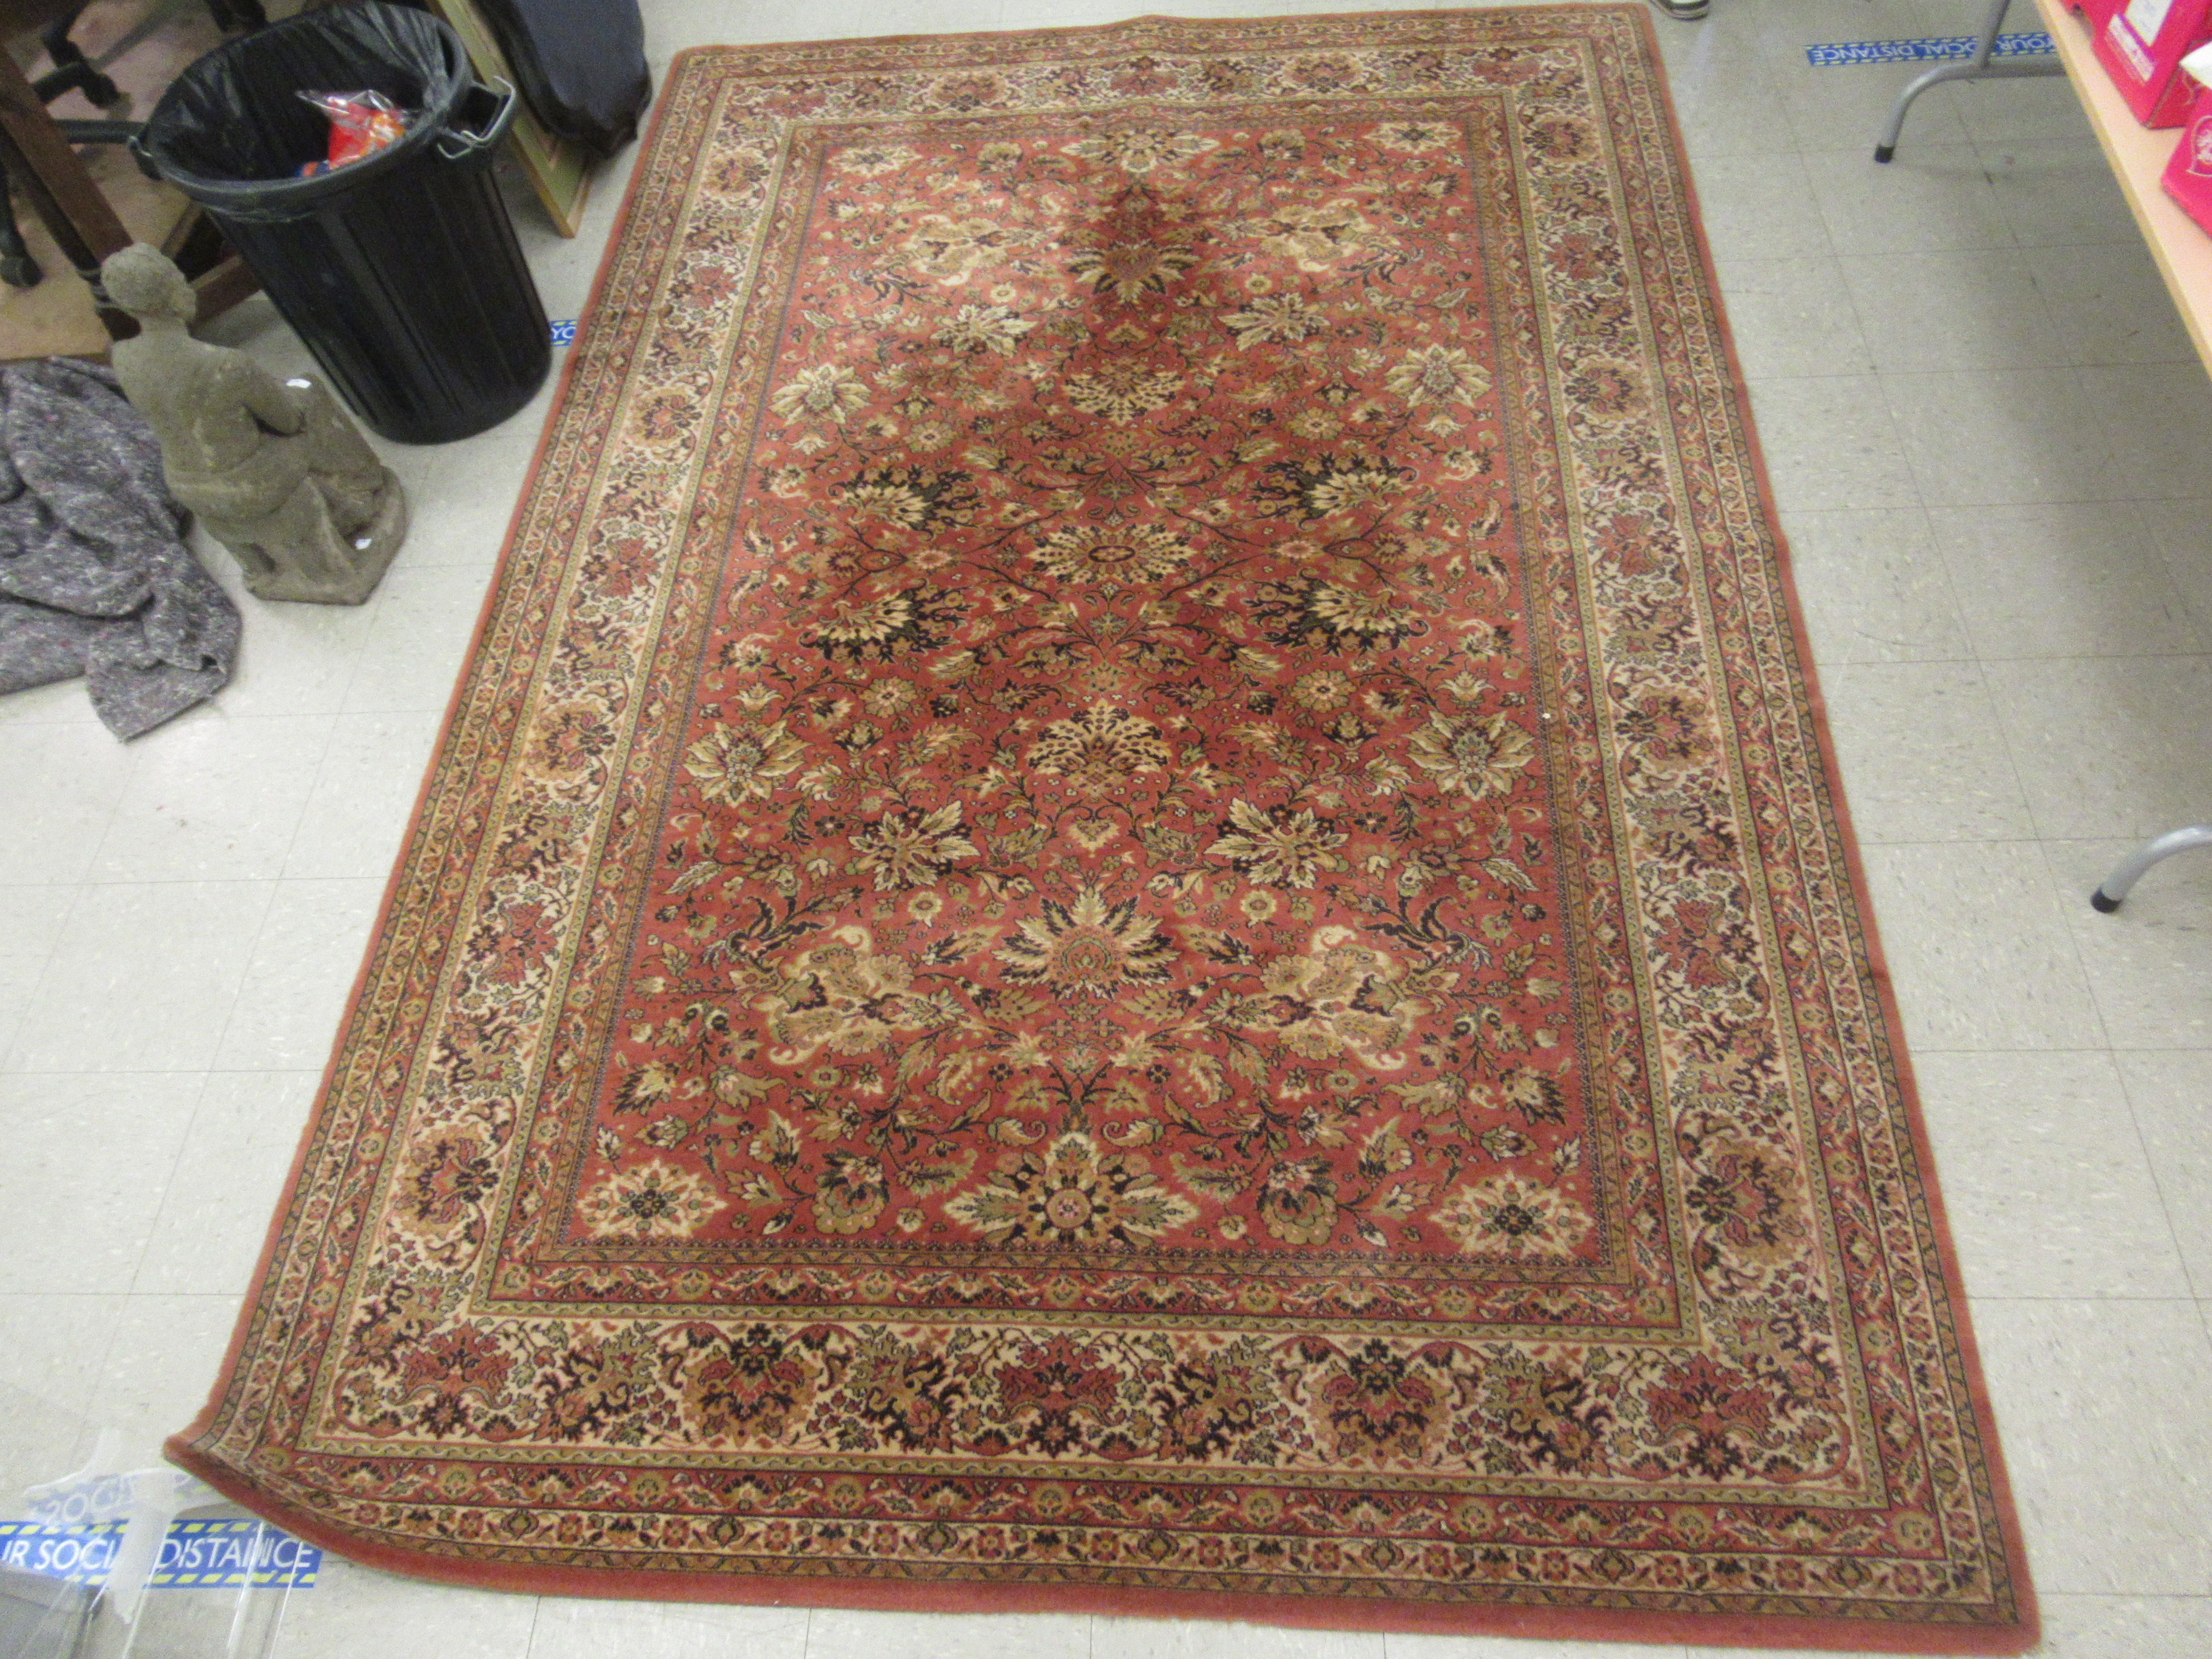 A Belgian rug with floral motifs on an iron red ground 120'' x 78'' LAM